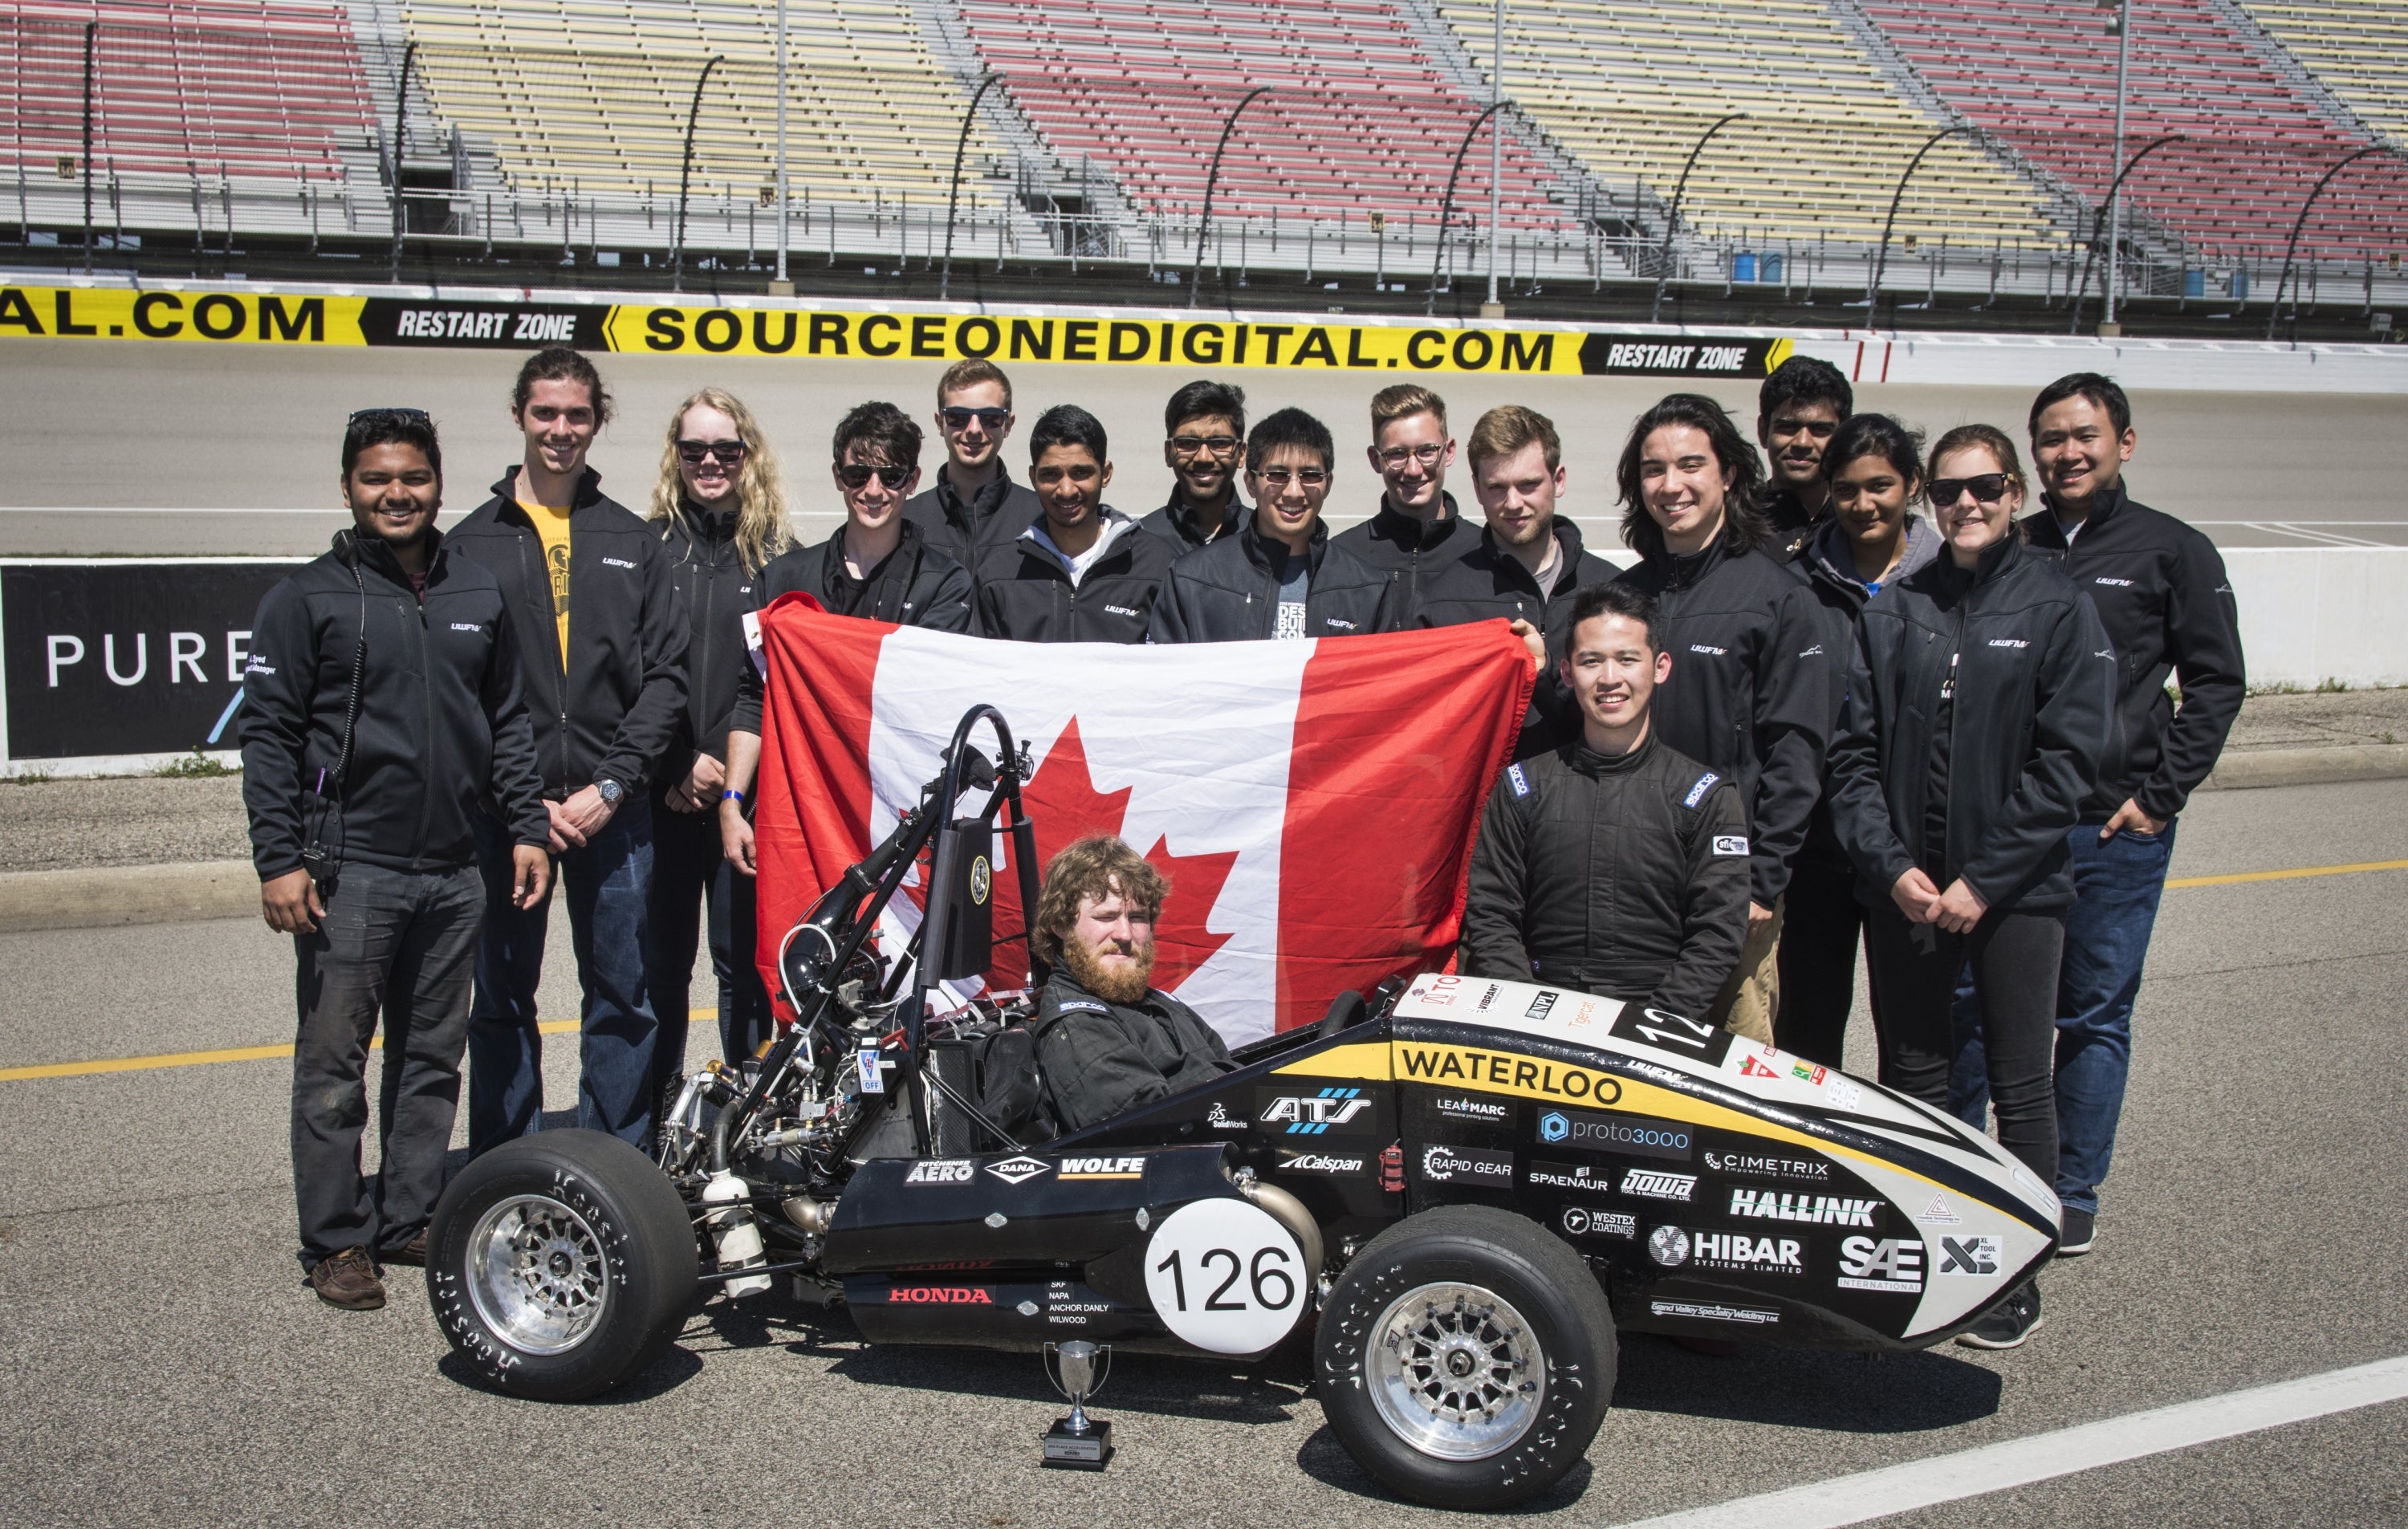 UW Formula Motorspots Team with their car adn showing their canadian pride with the flag!